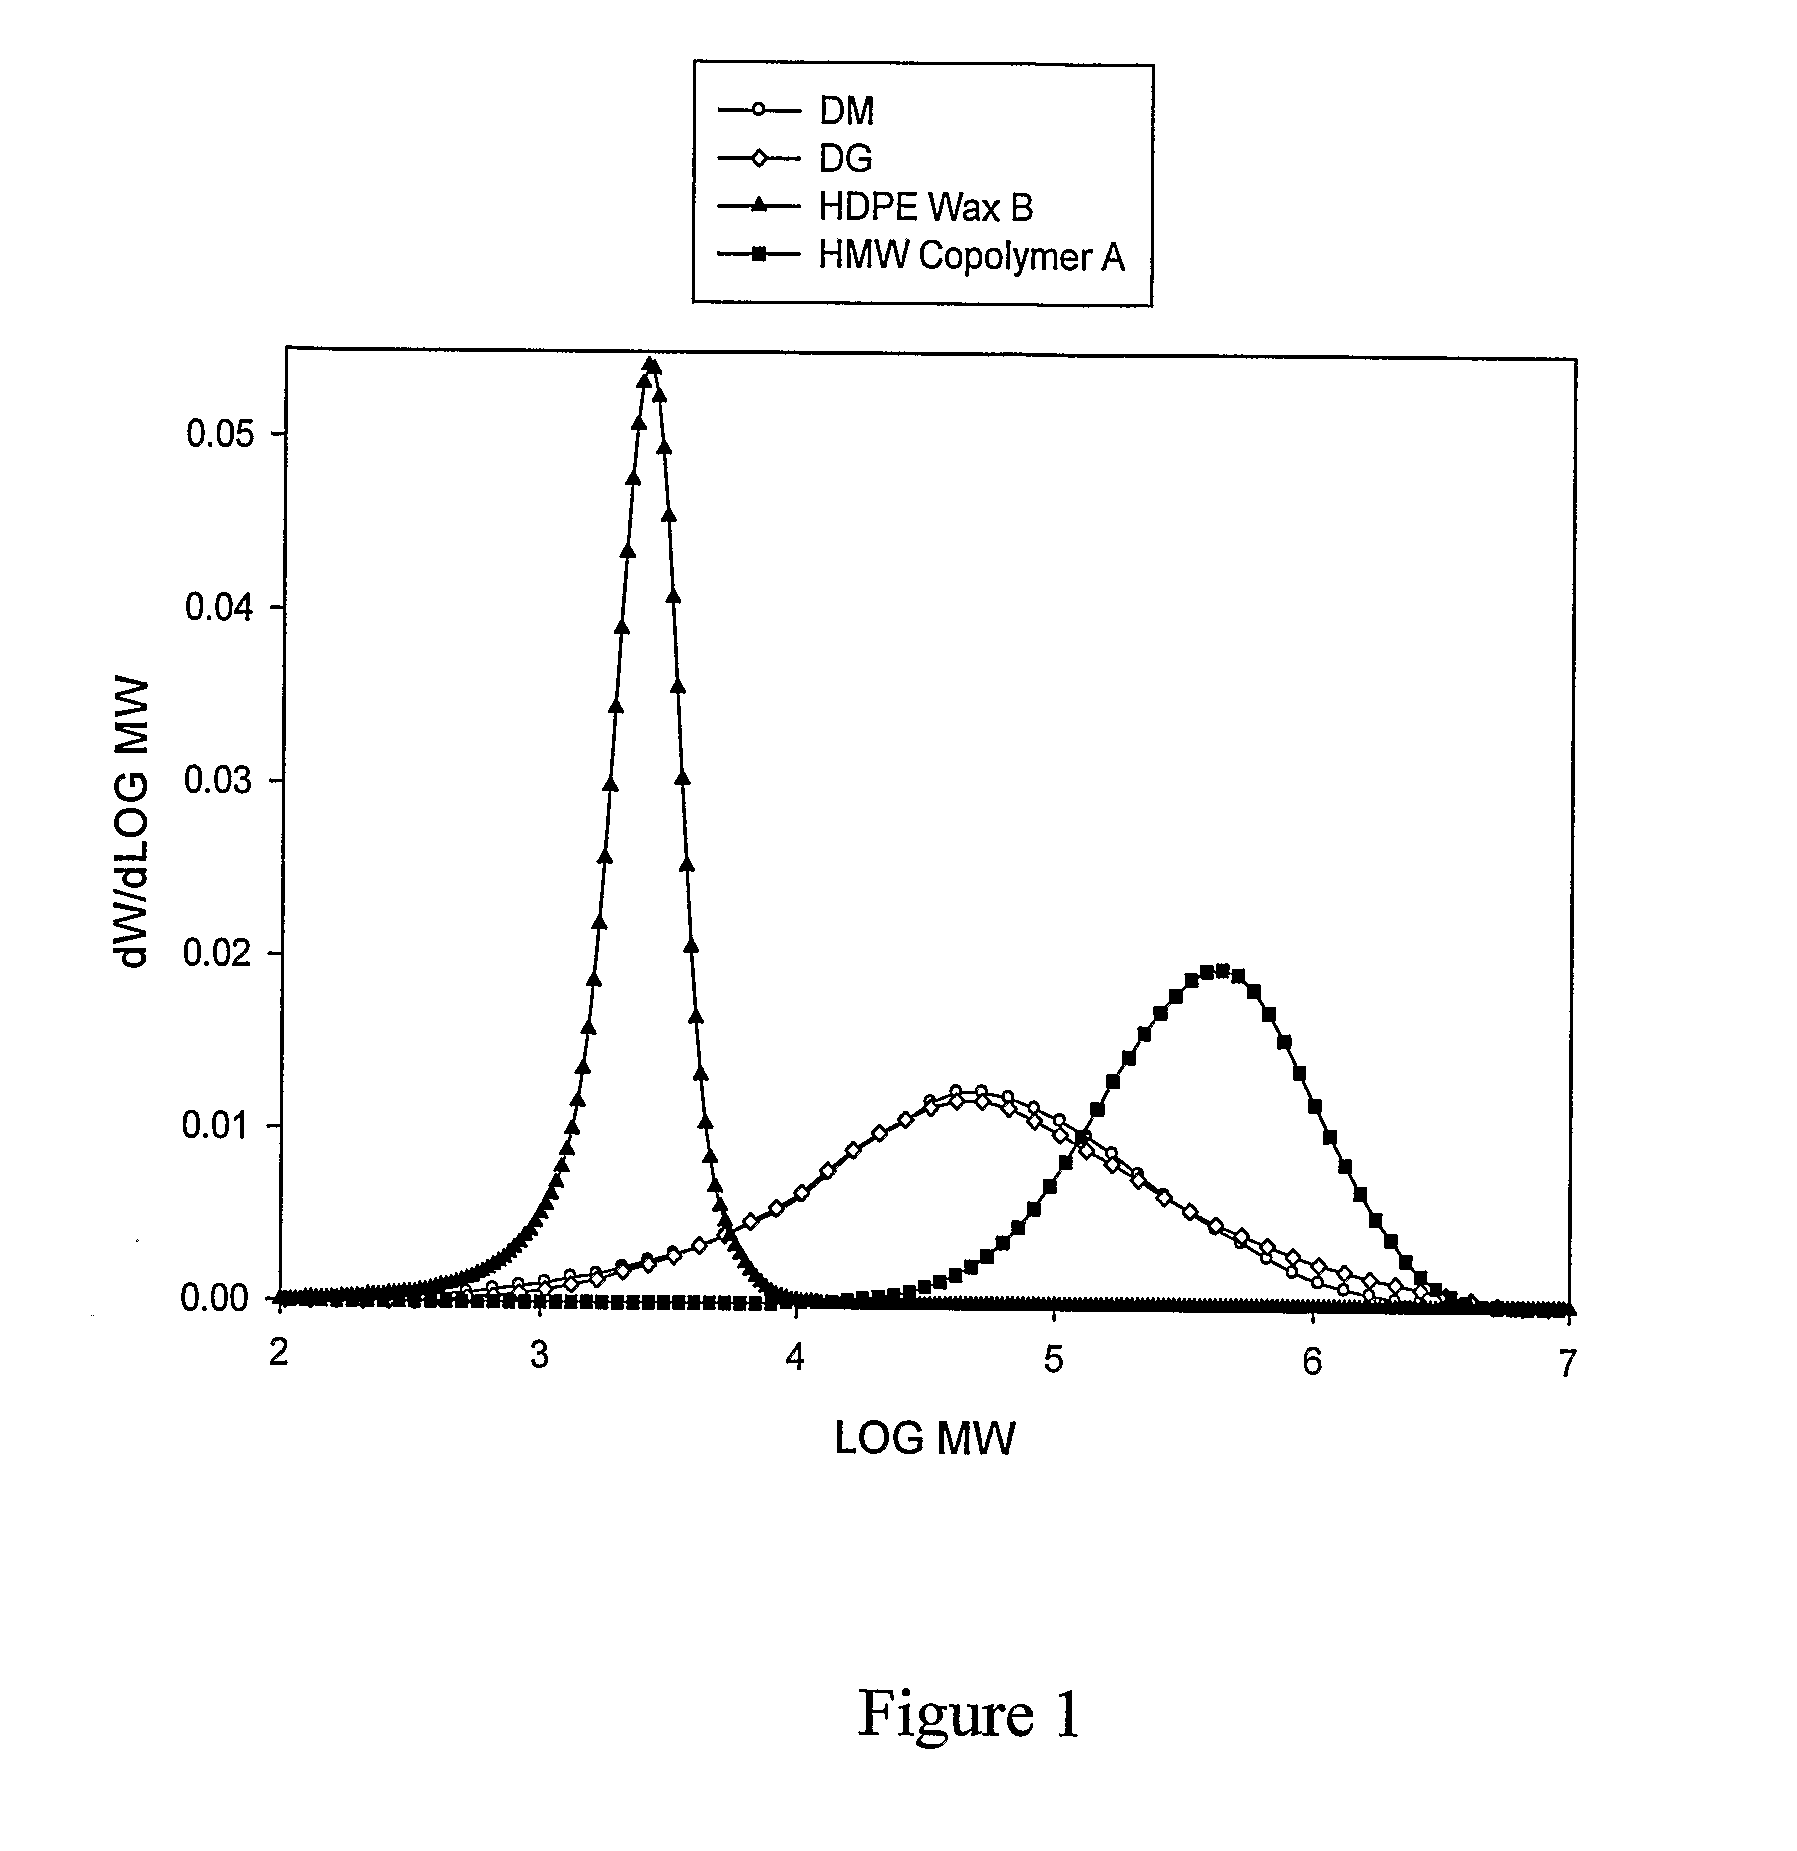 Polyolefin compositions, articles made therefrom and methods for preparing the same